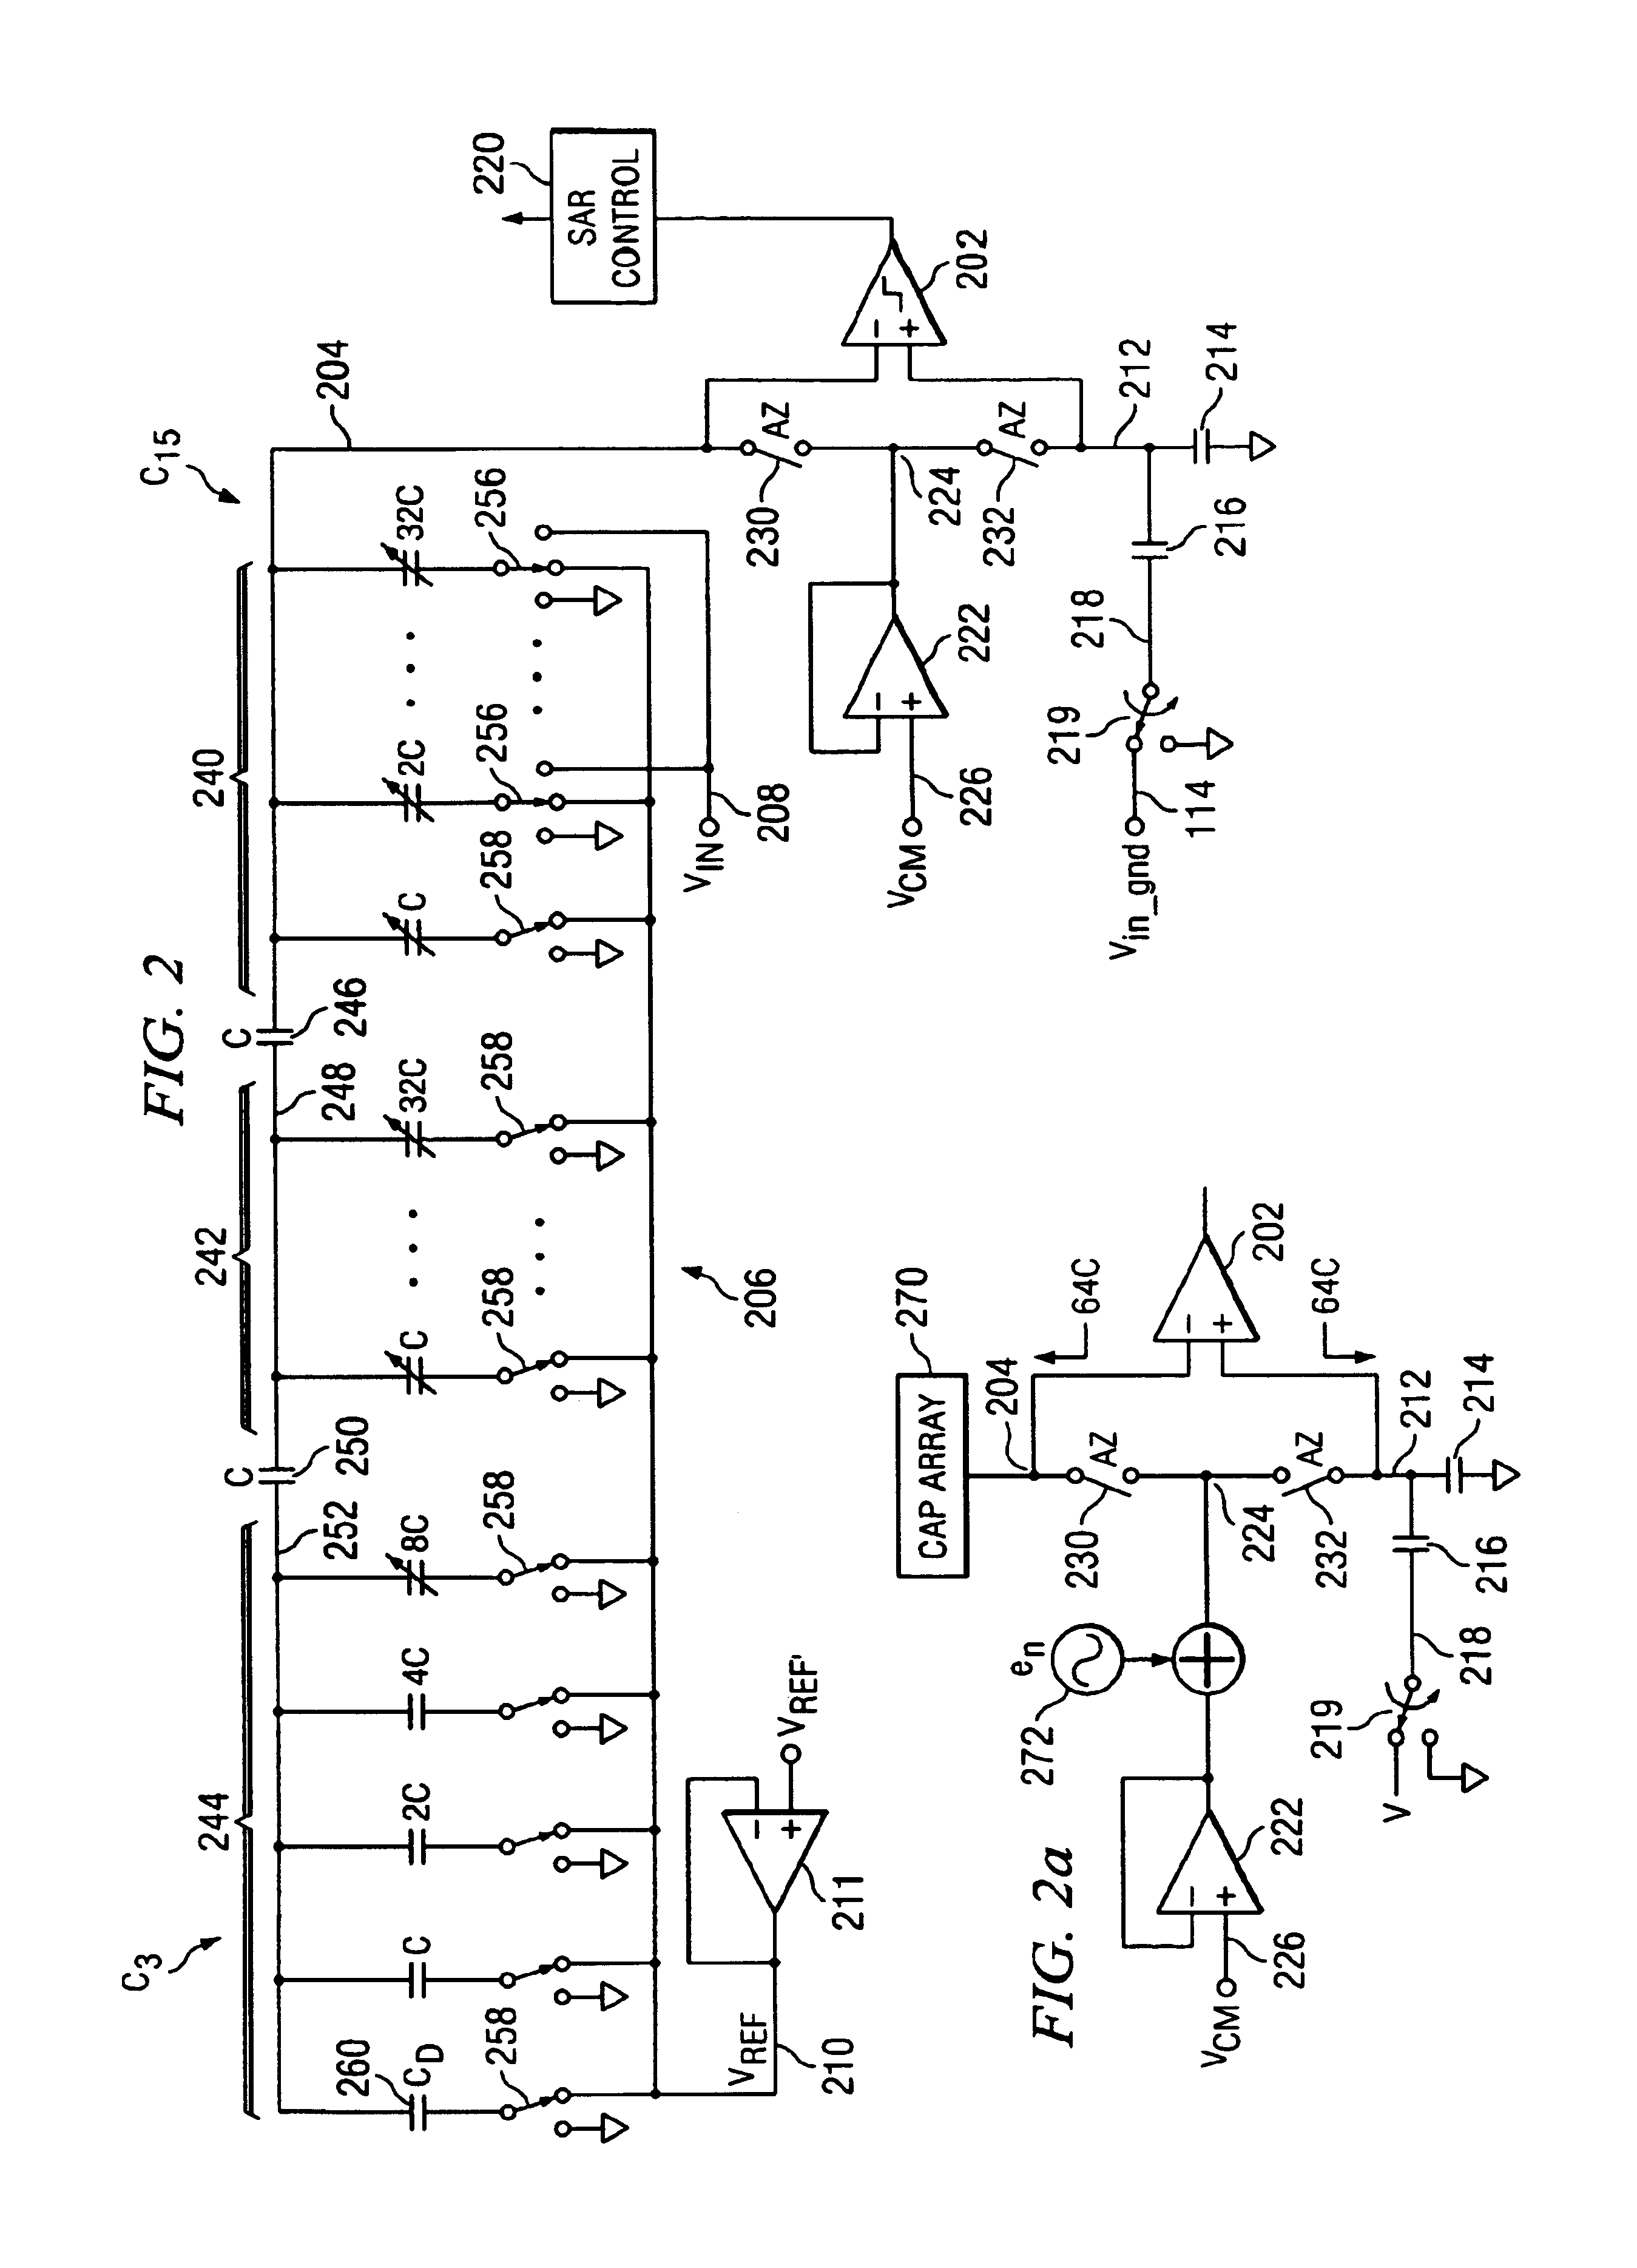 Noise cancellation in a single ended SAR converter